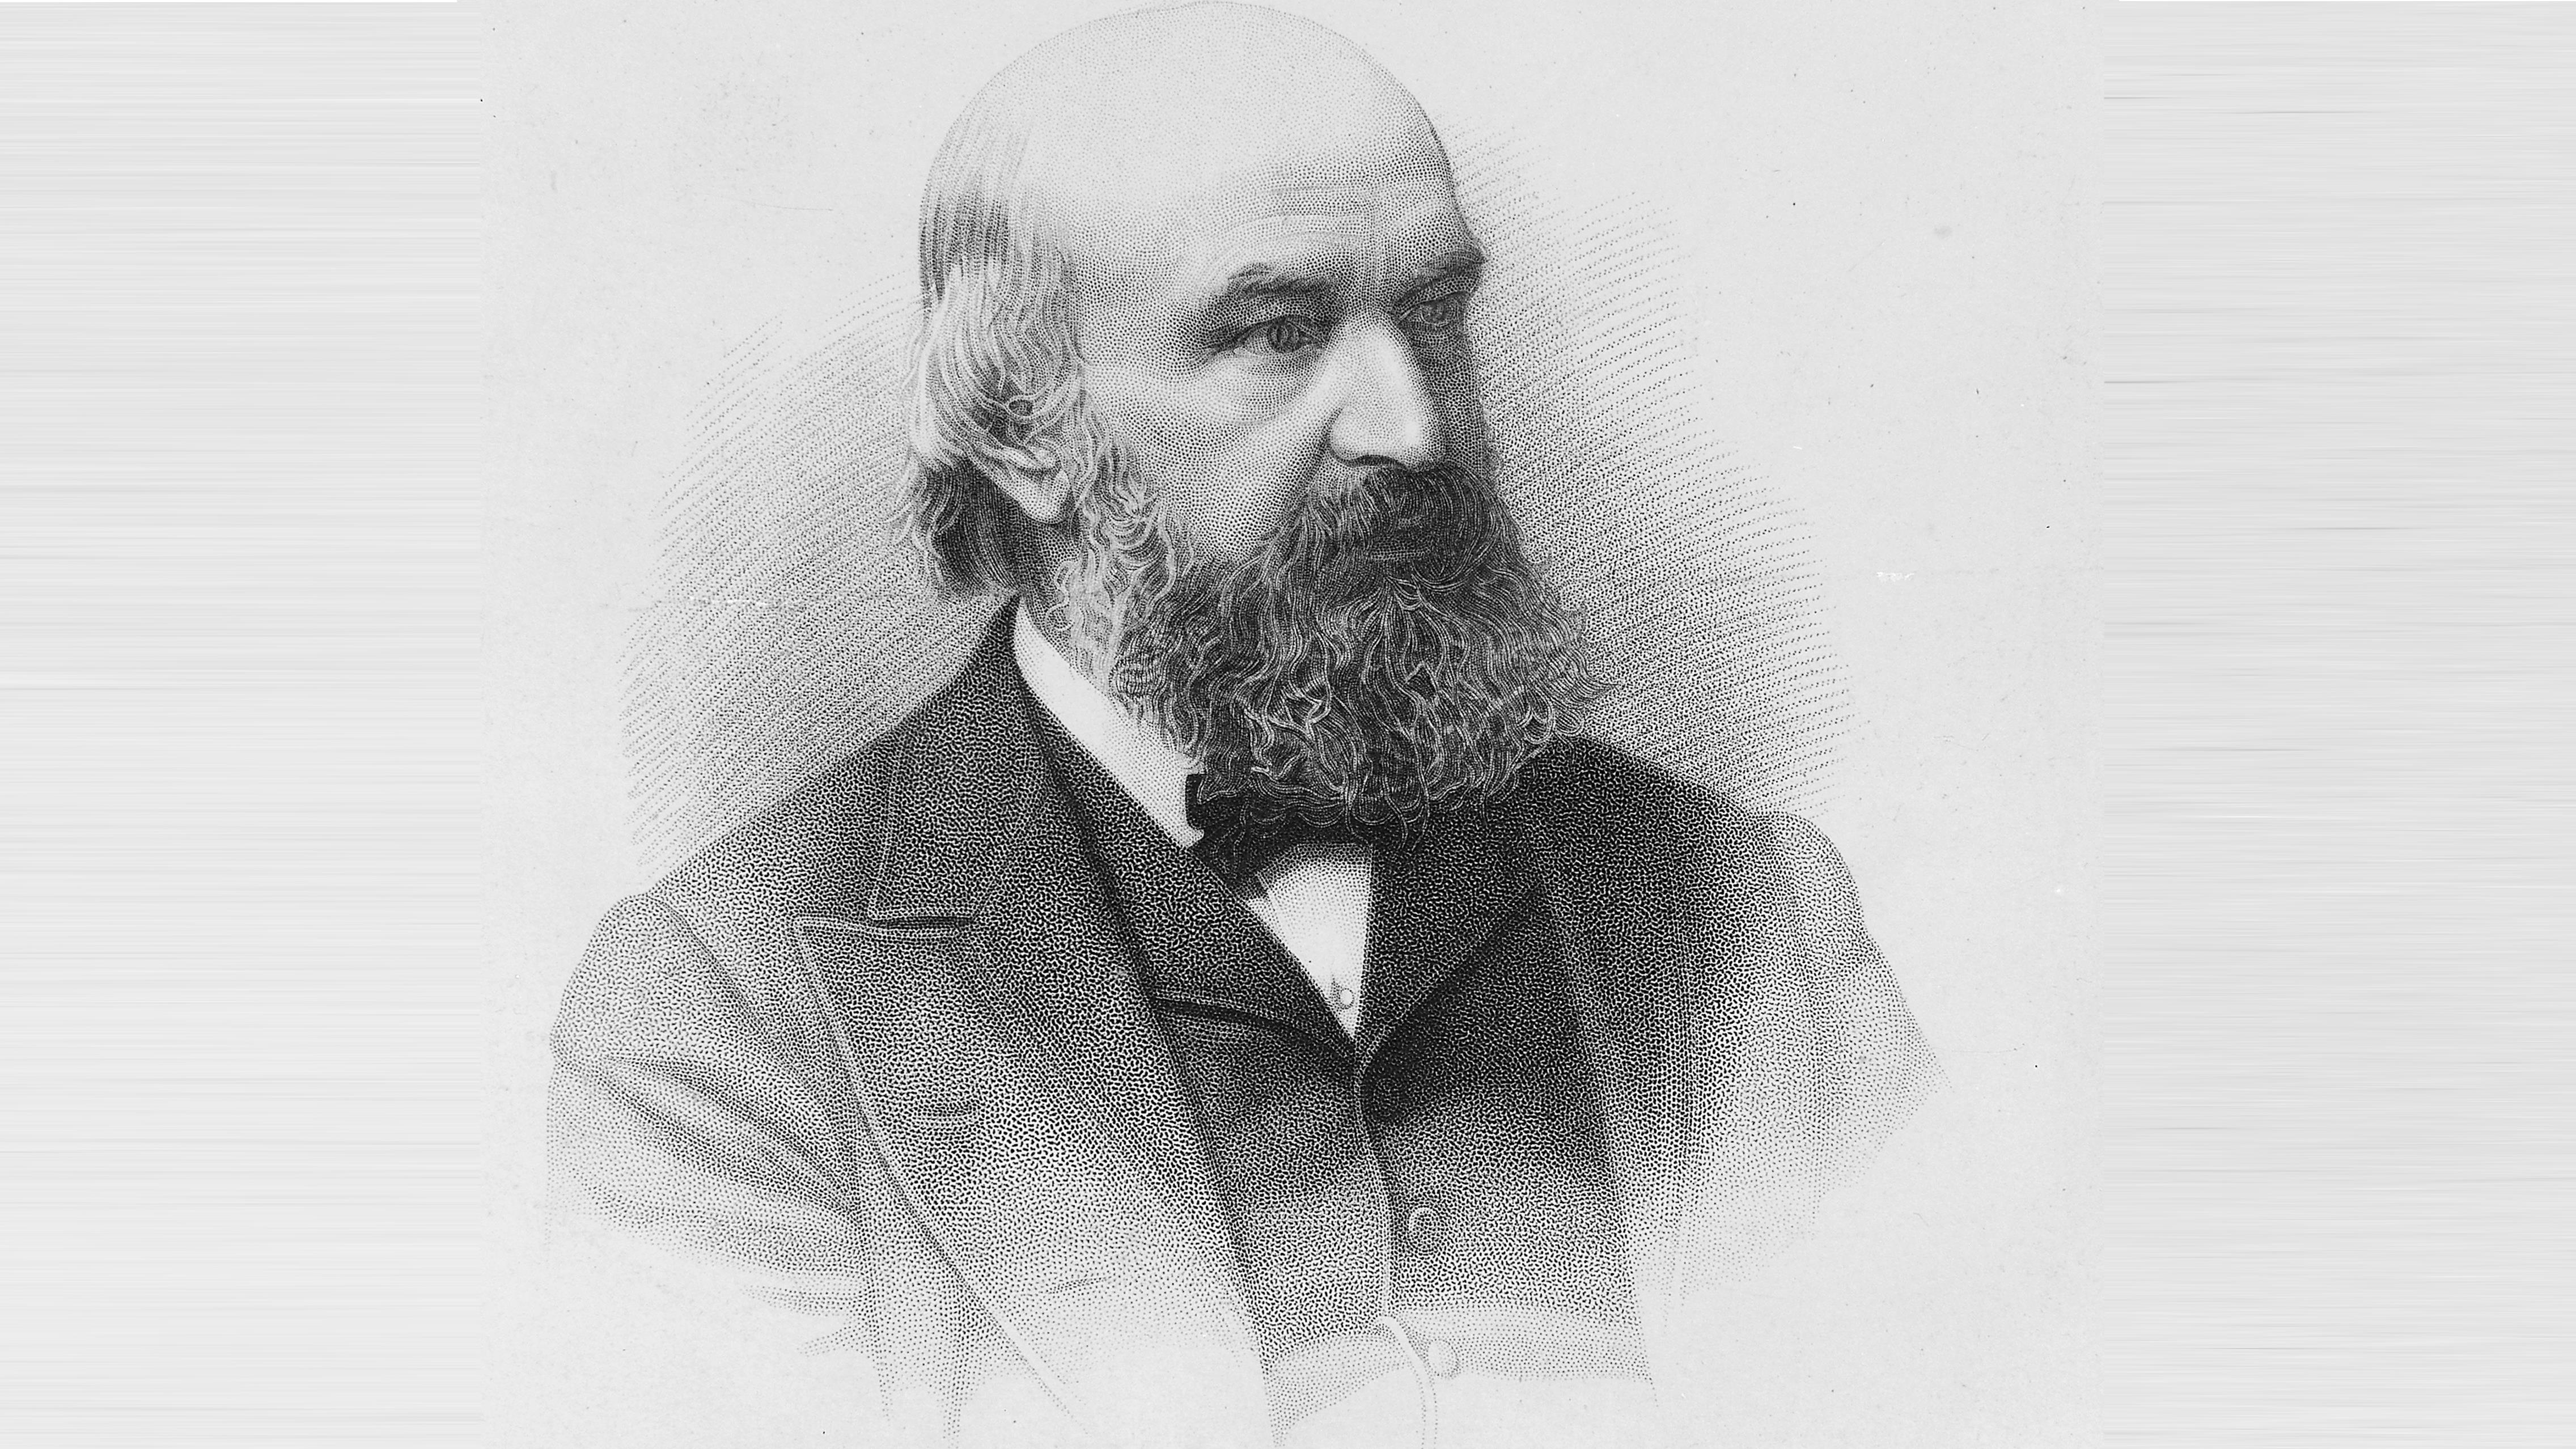 Black and white sketch of a bald man with a long beard, wearing a suit and bow tie, looking to his left.